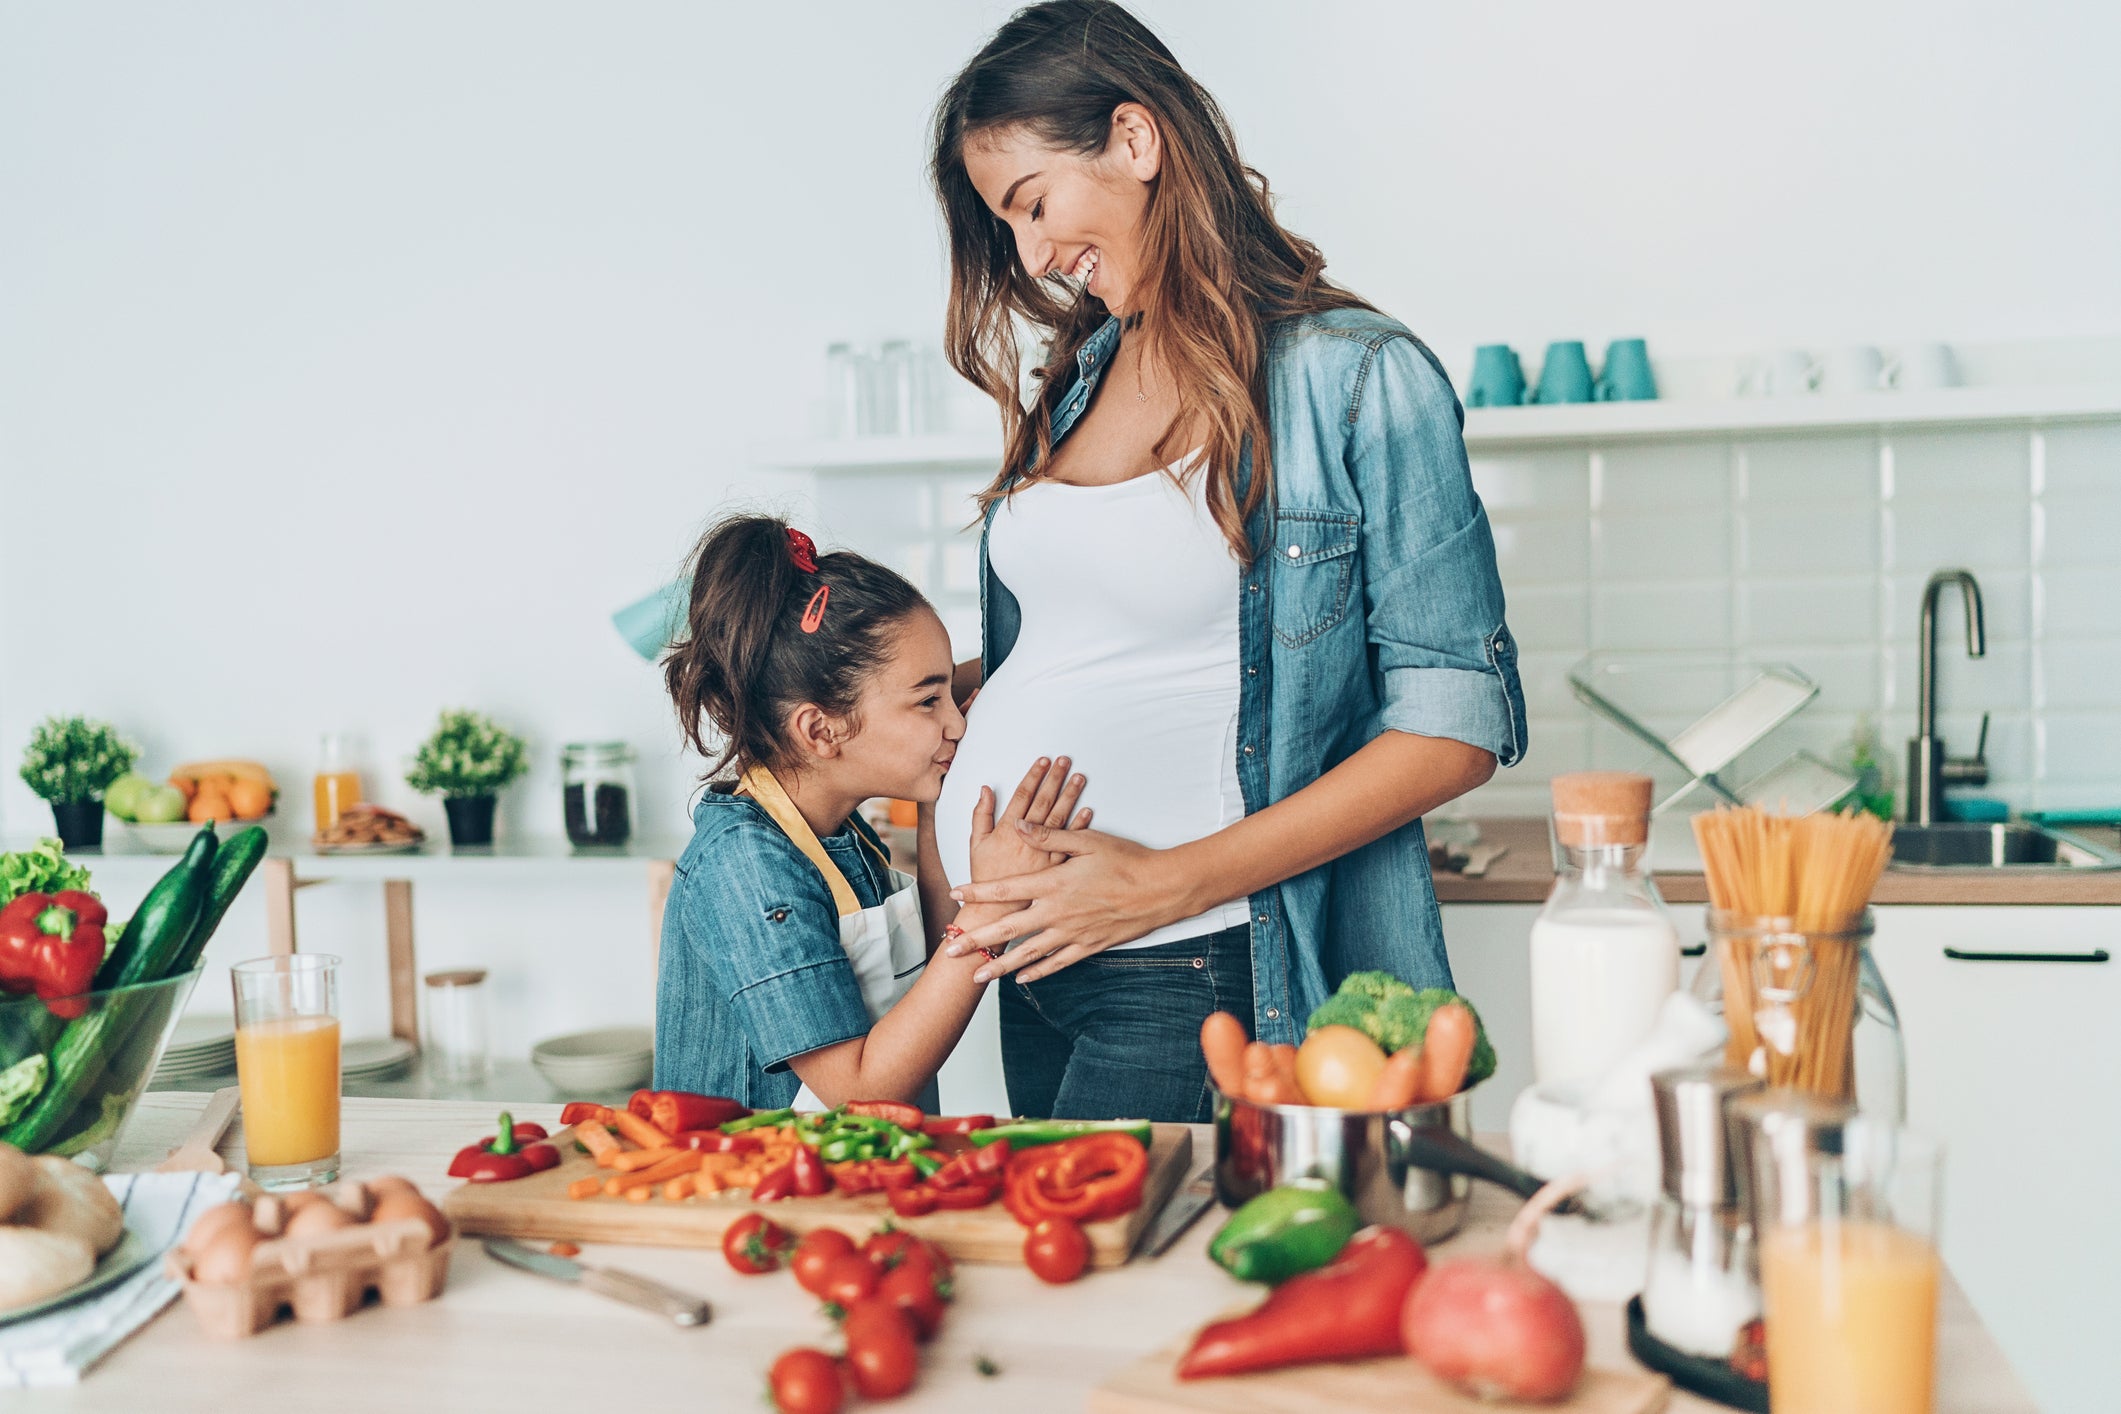 Staying Healthy During Pregnancy